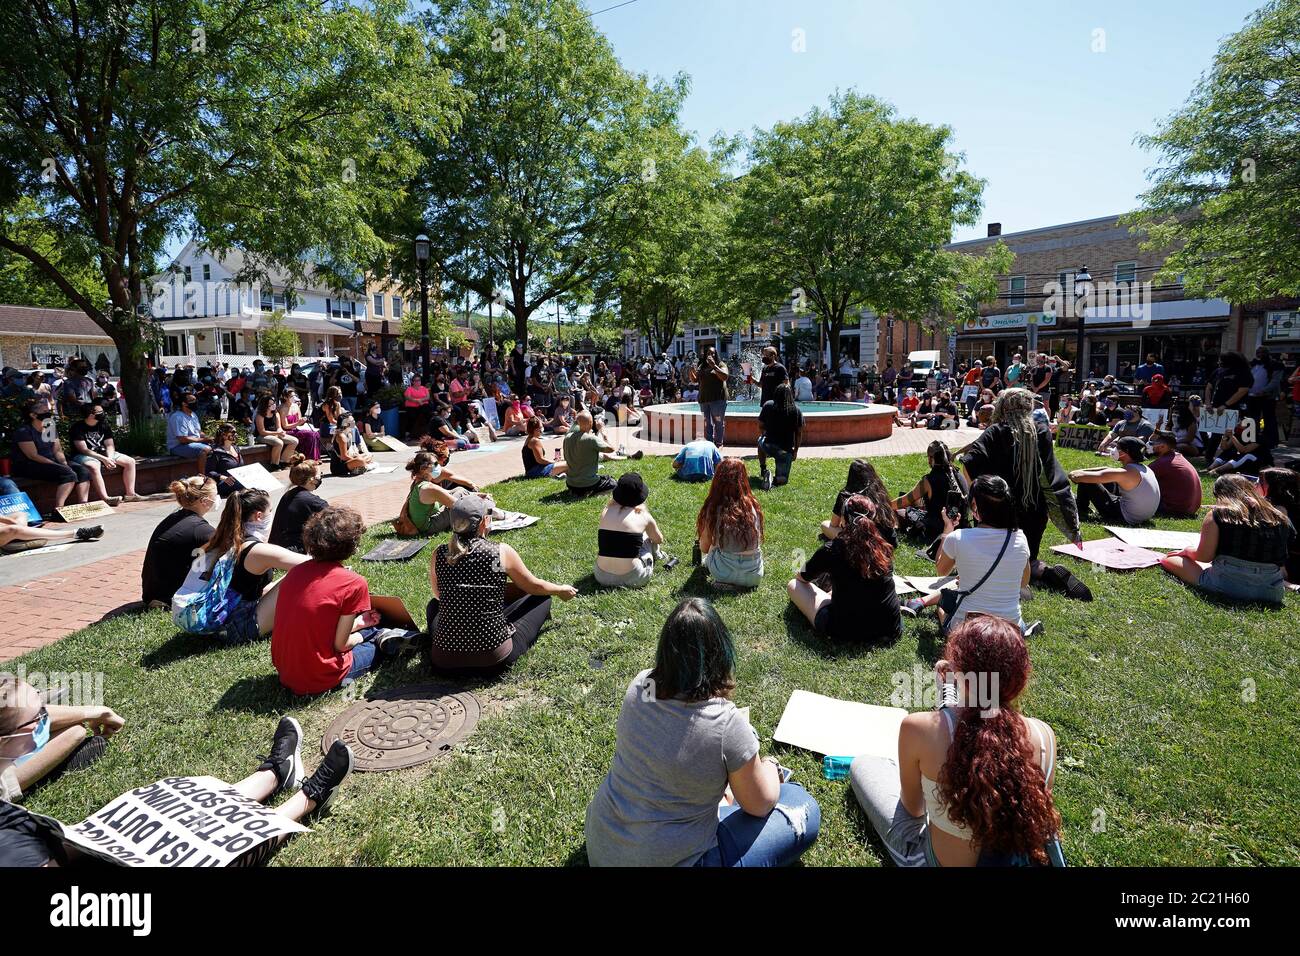 Hundreds gathered June 14, 2020, for a peace march in support of Black Lives Matter in the small town borough of Emmaus, Pennsylvania. Stock Photo